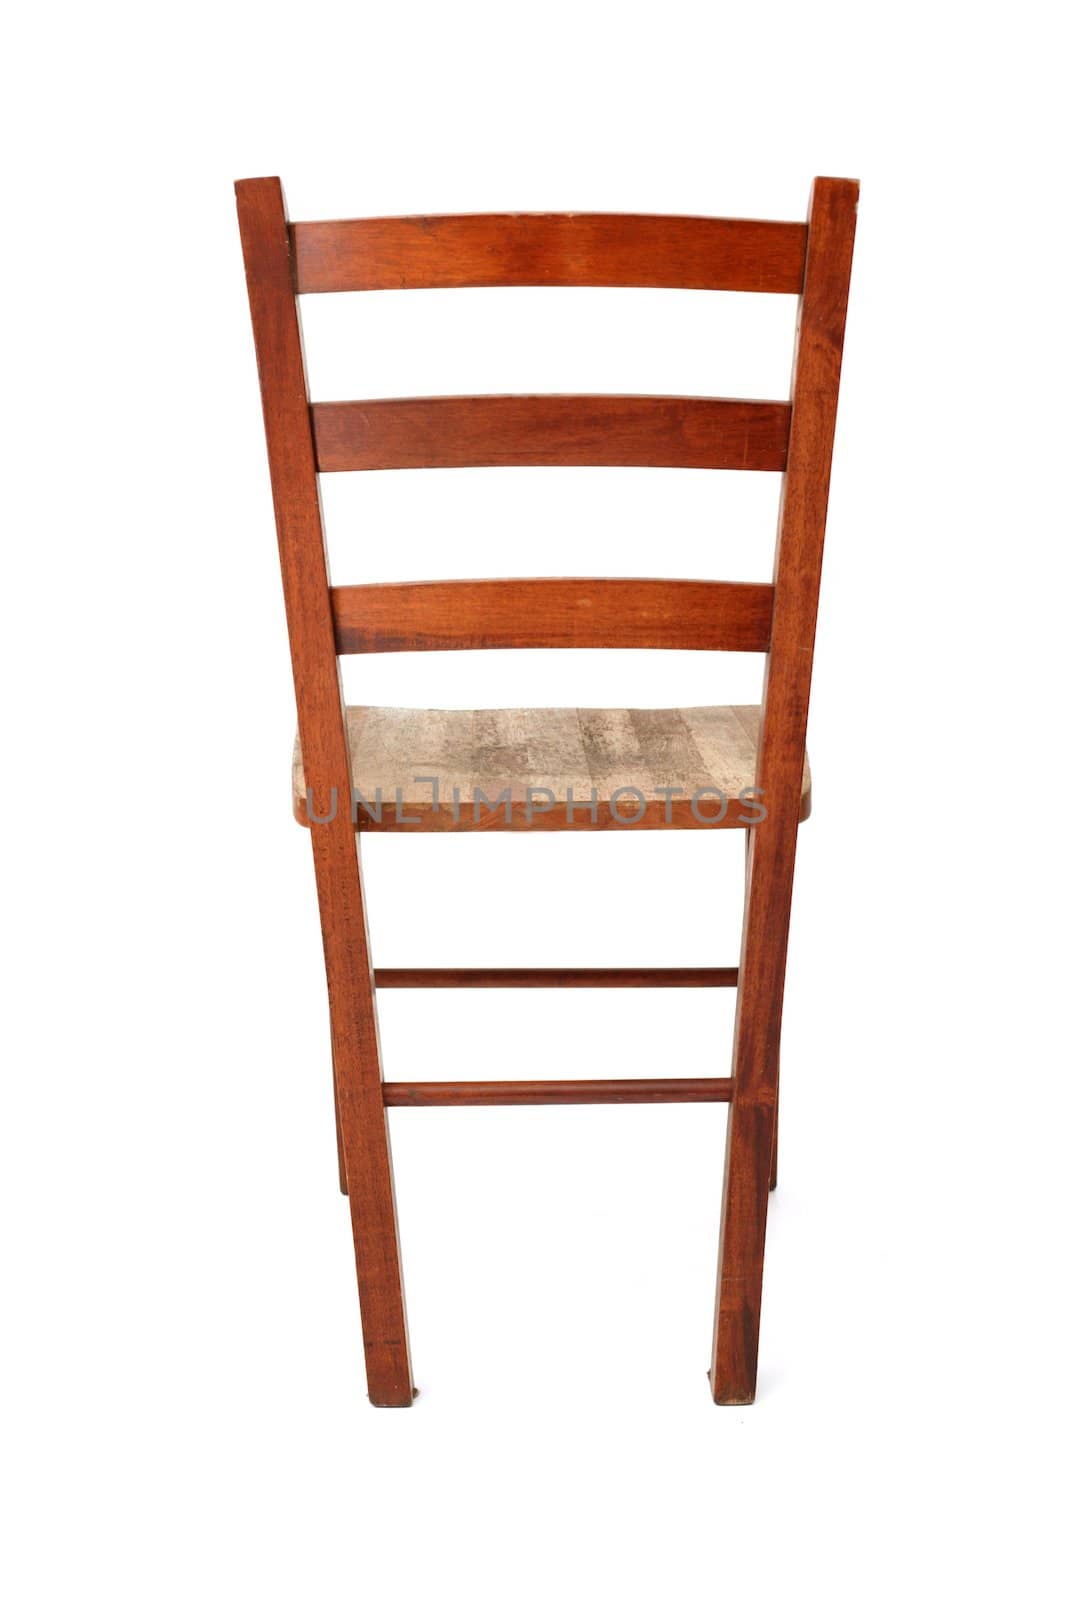 A wooden chair isolated against a white background